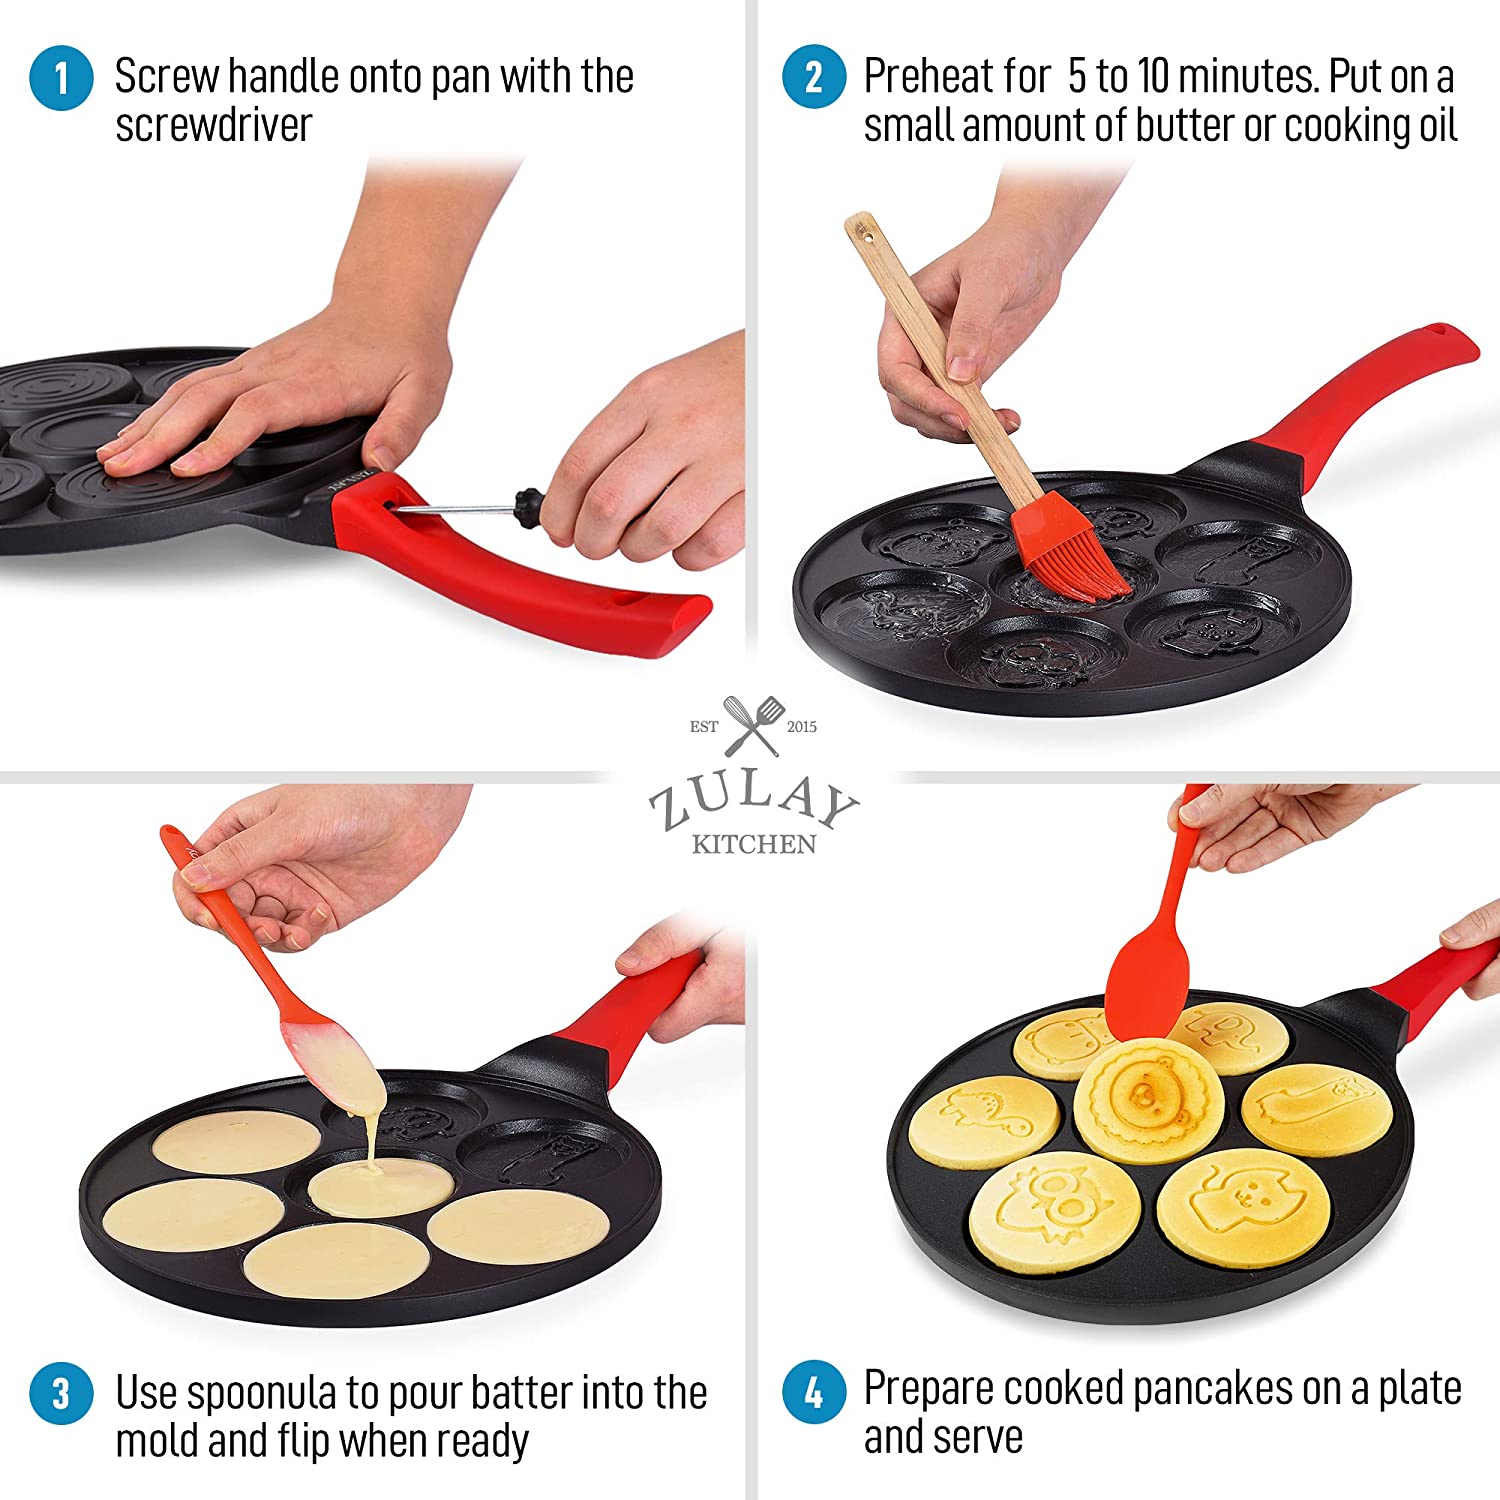 Animal Mini Pancake Pan - Make 7 Unique Flapjack Zoo Animals, Including a  Elephant, Giraffe and More- Nonstick Pan Cake Maker Griddle for Breakfast